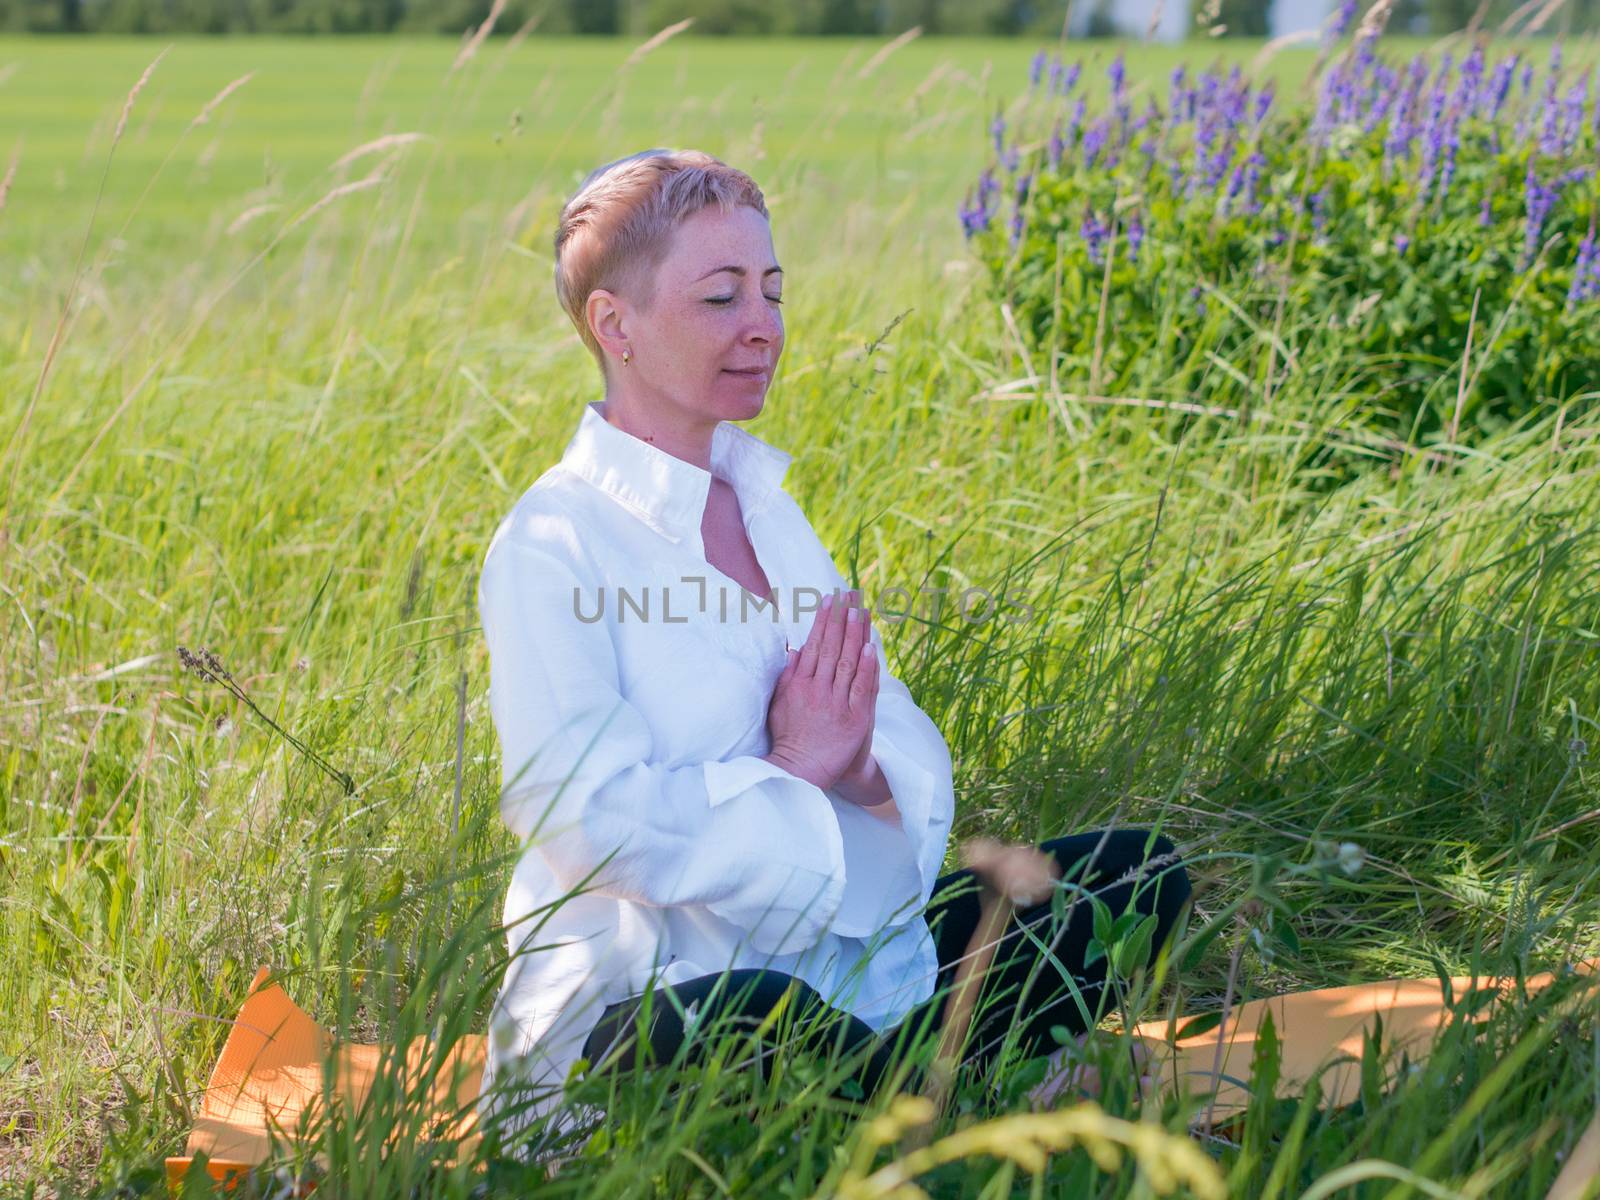 Mature woman practices yoga in nature